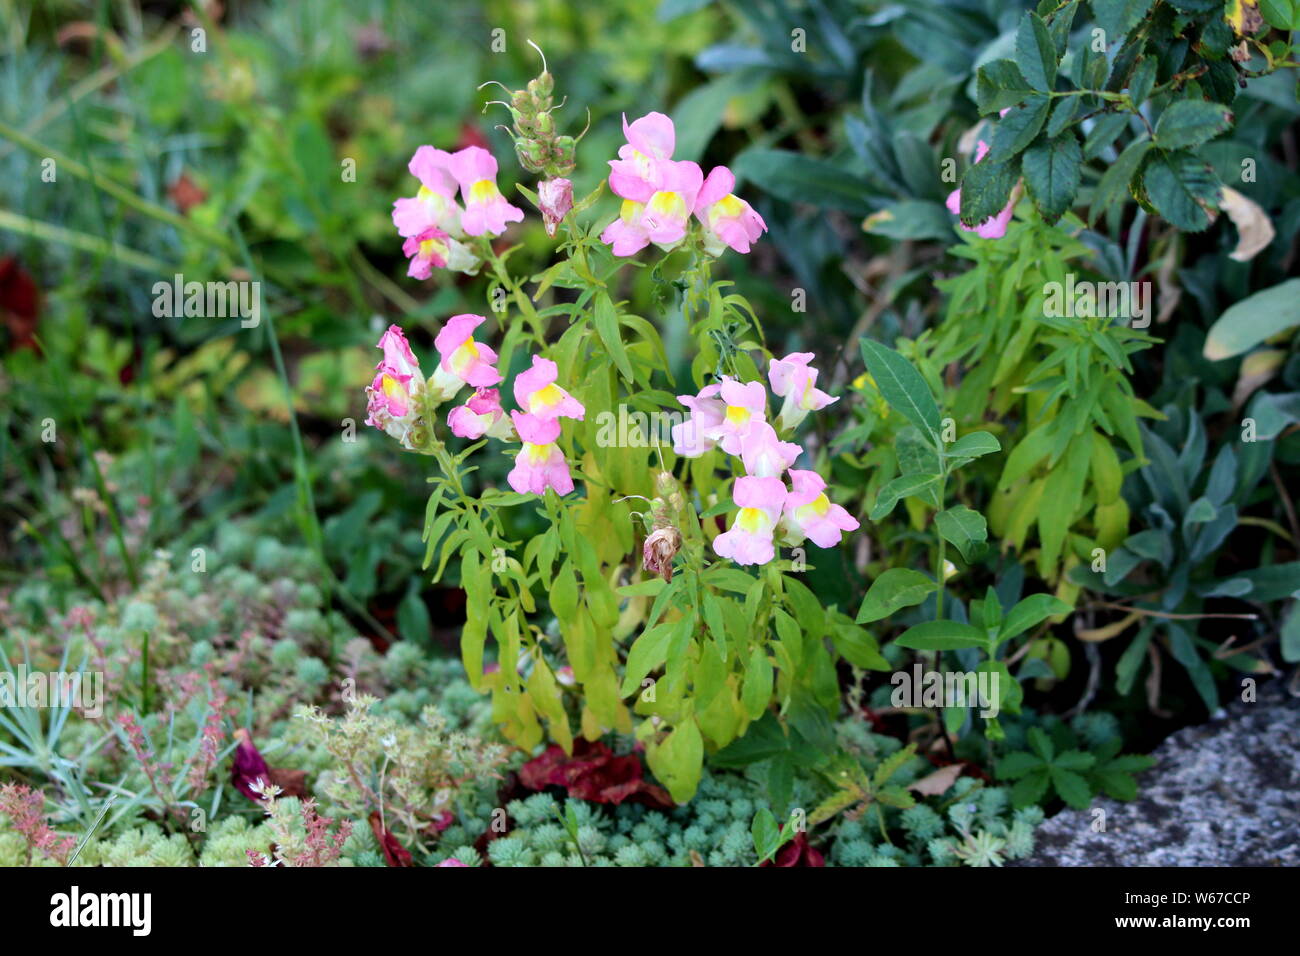 Common snapdragon or Antirrhinum majus flowering plants with light pink open blooming flowers growing in shape of small bush in local urban garden Stock Photo